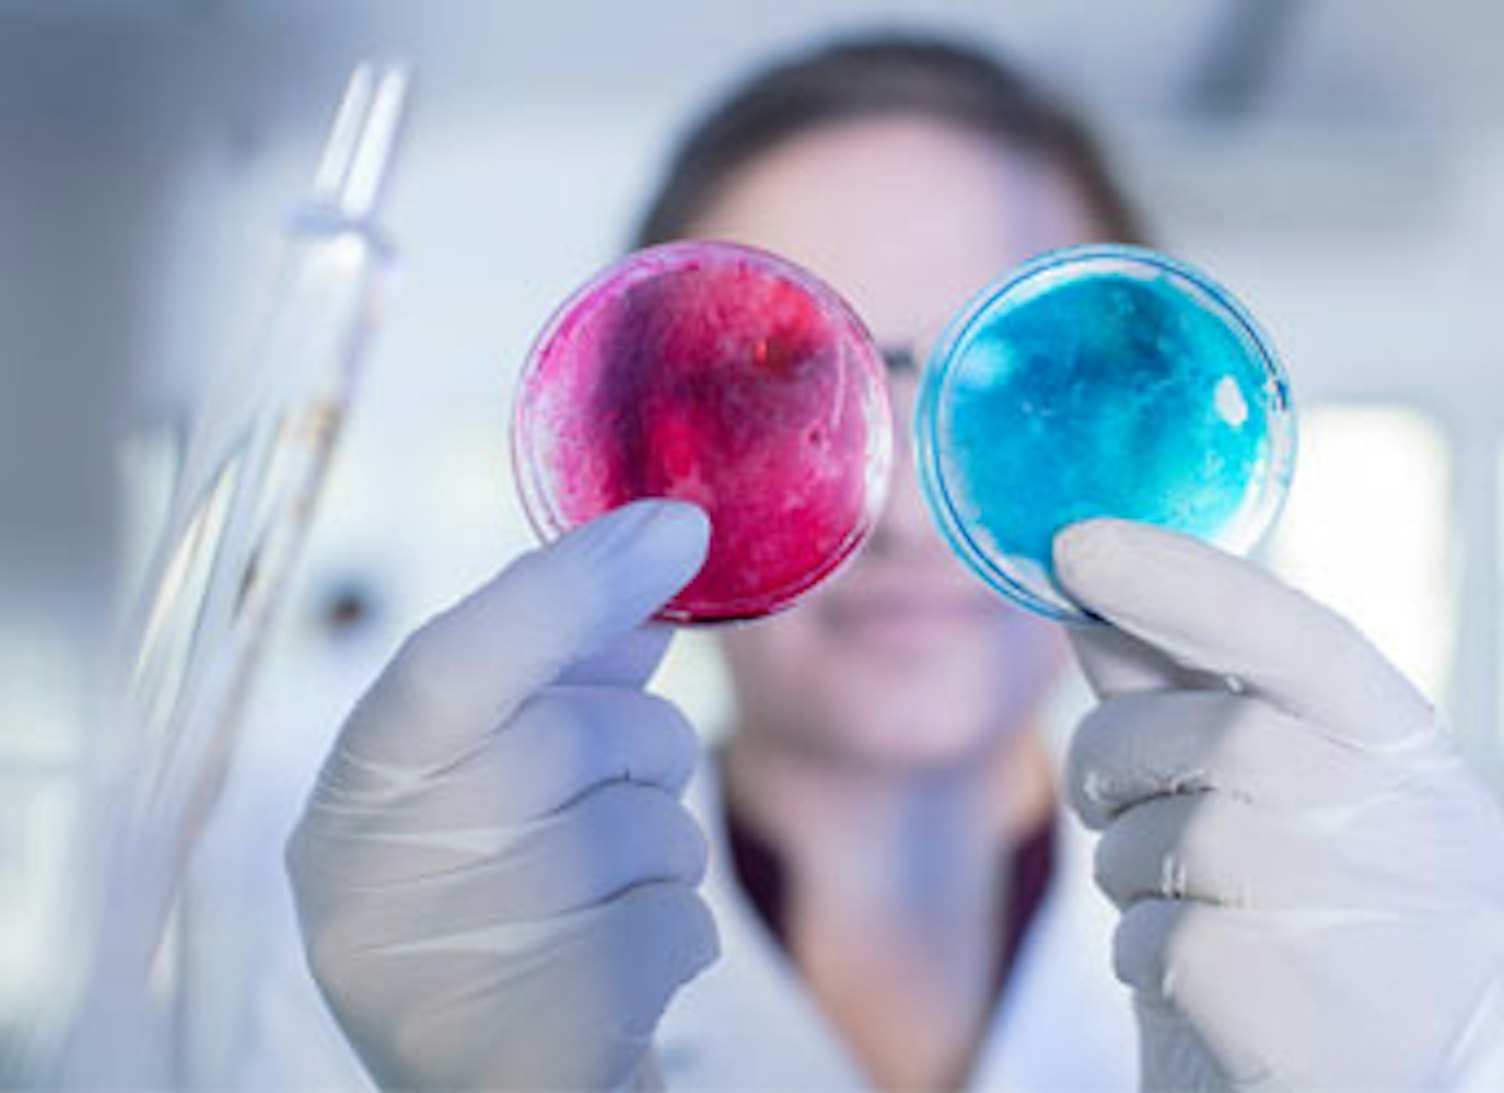 Laboratory Worker Examining Two Petri Dishes Side by Side